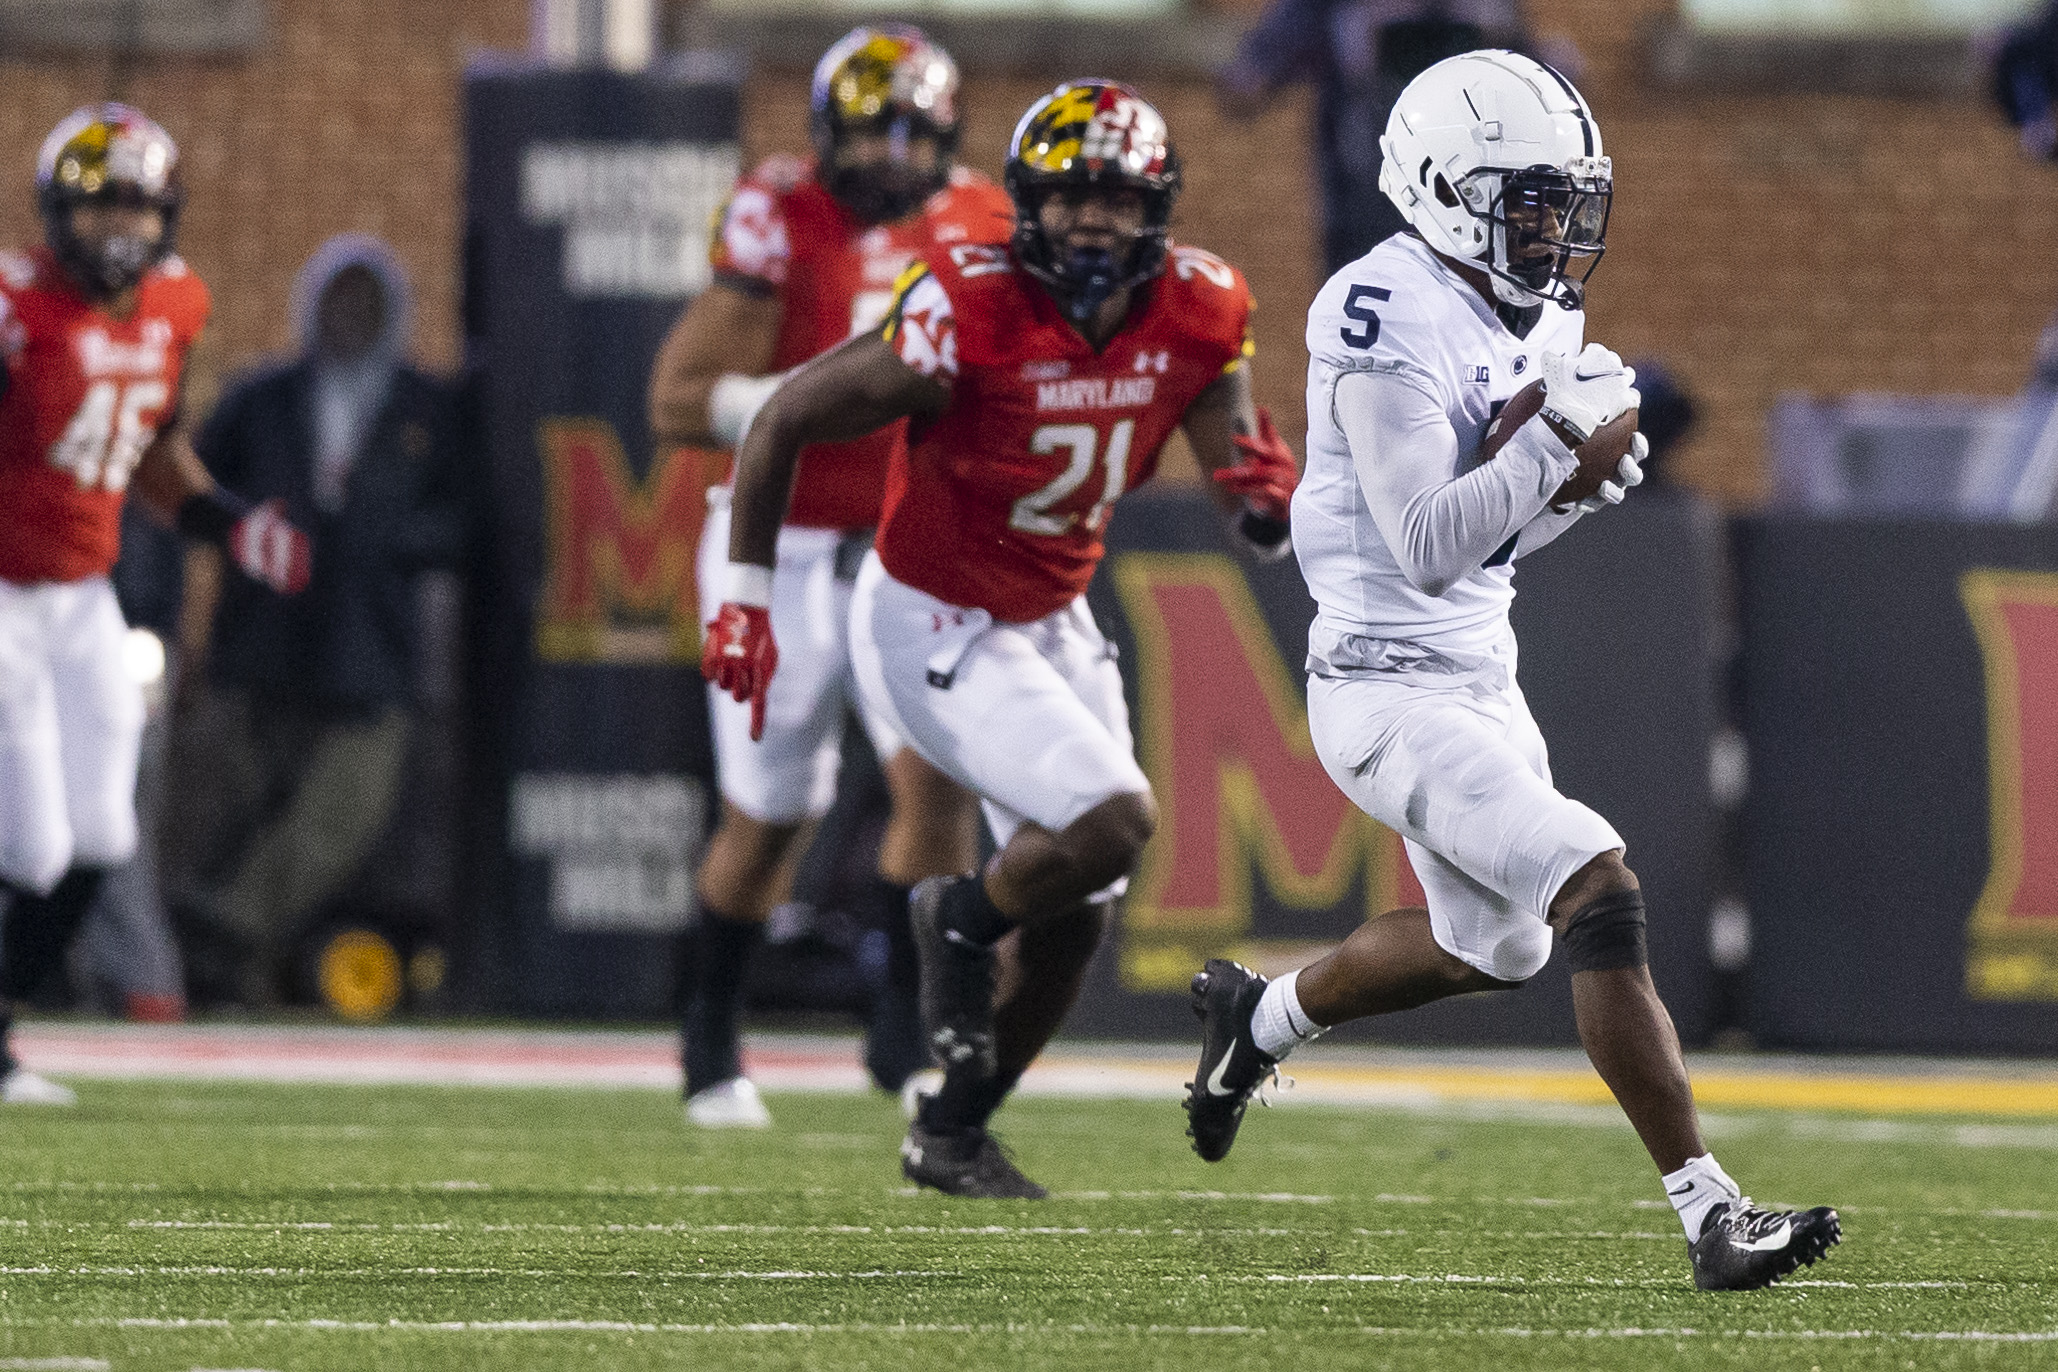 Penn State wide receiver Jahan Dotson goes in for an 86-yard touchdown catch and run during the fourth quarter on Nov. 6, 2021. Joe Hermitt | jhermitt@pennlive.com